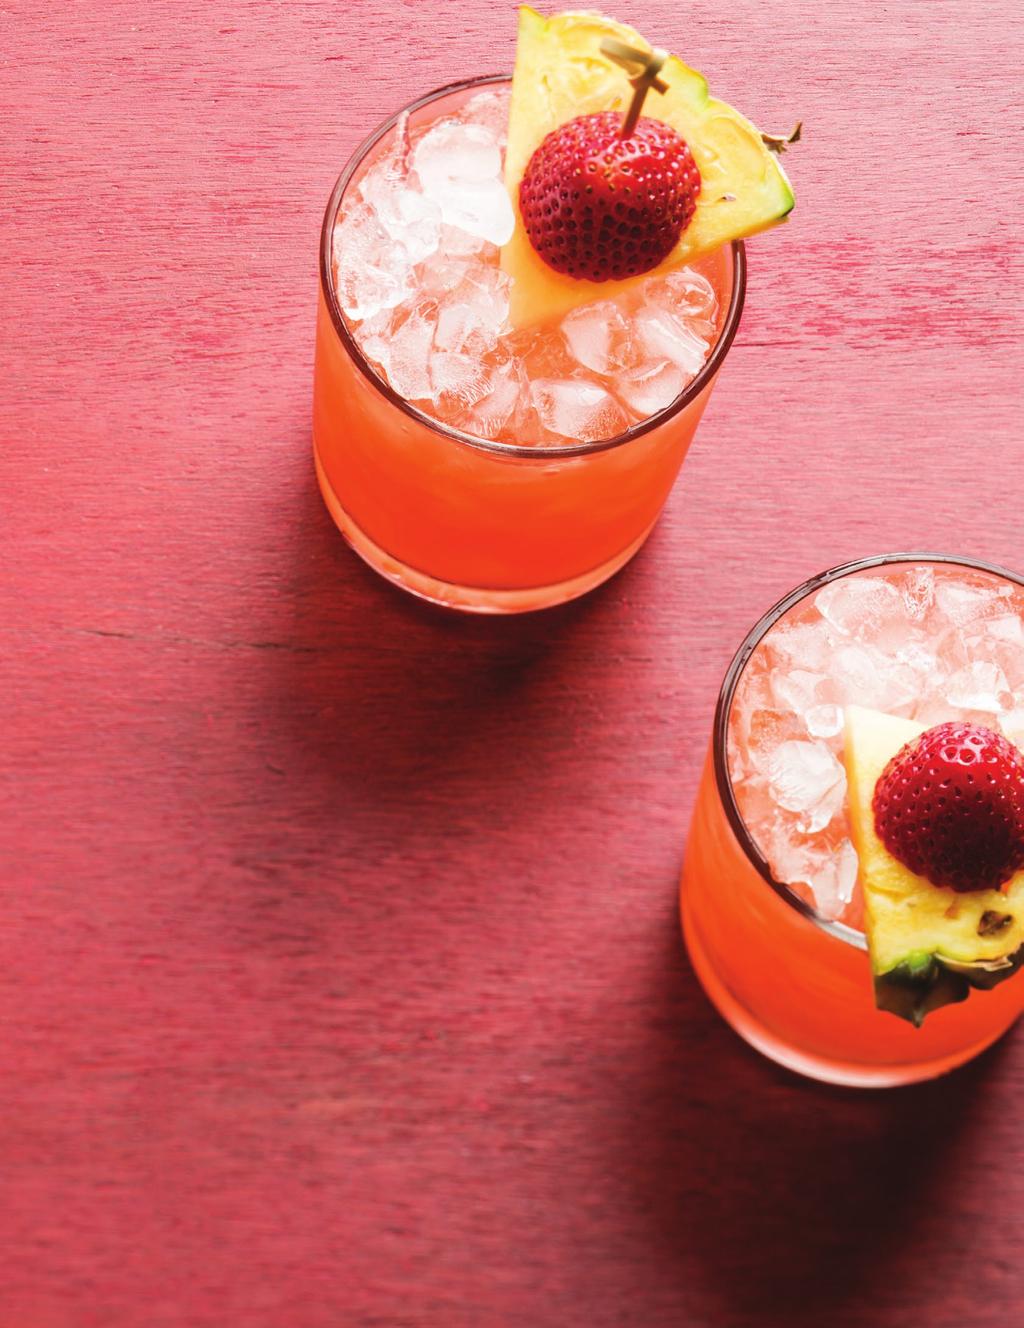 SOUTHERN HEMISPHERE SMASH This summery smash combines the sweetness of pineapple and strawberry with the floral fruitiness of pisco.